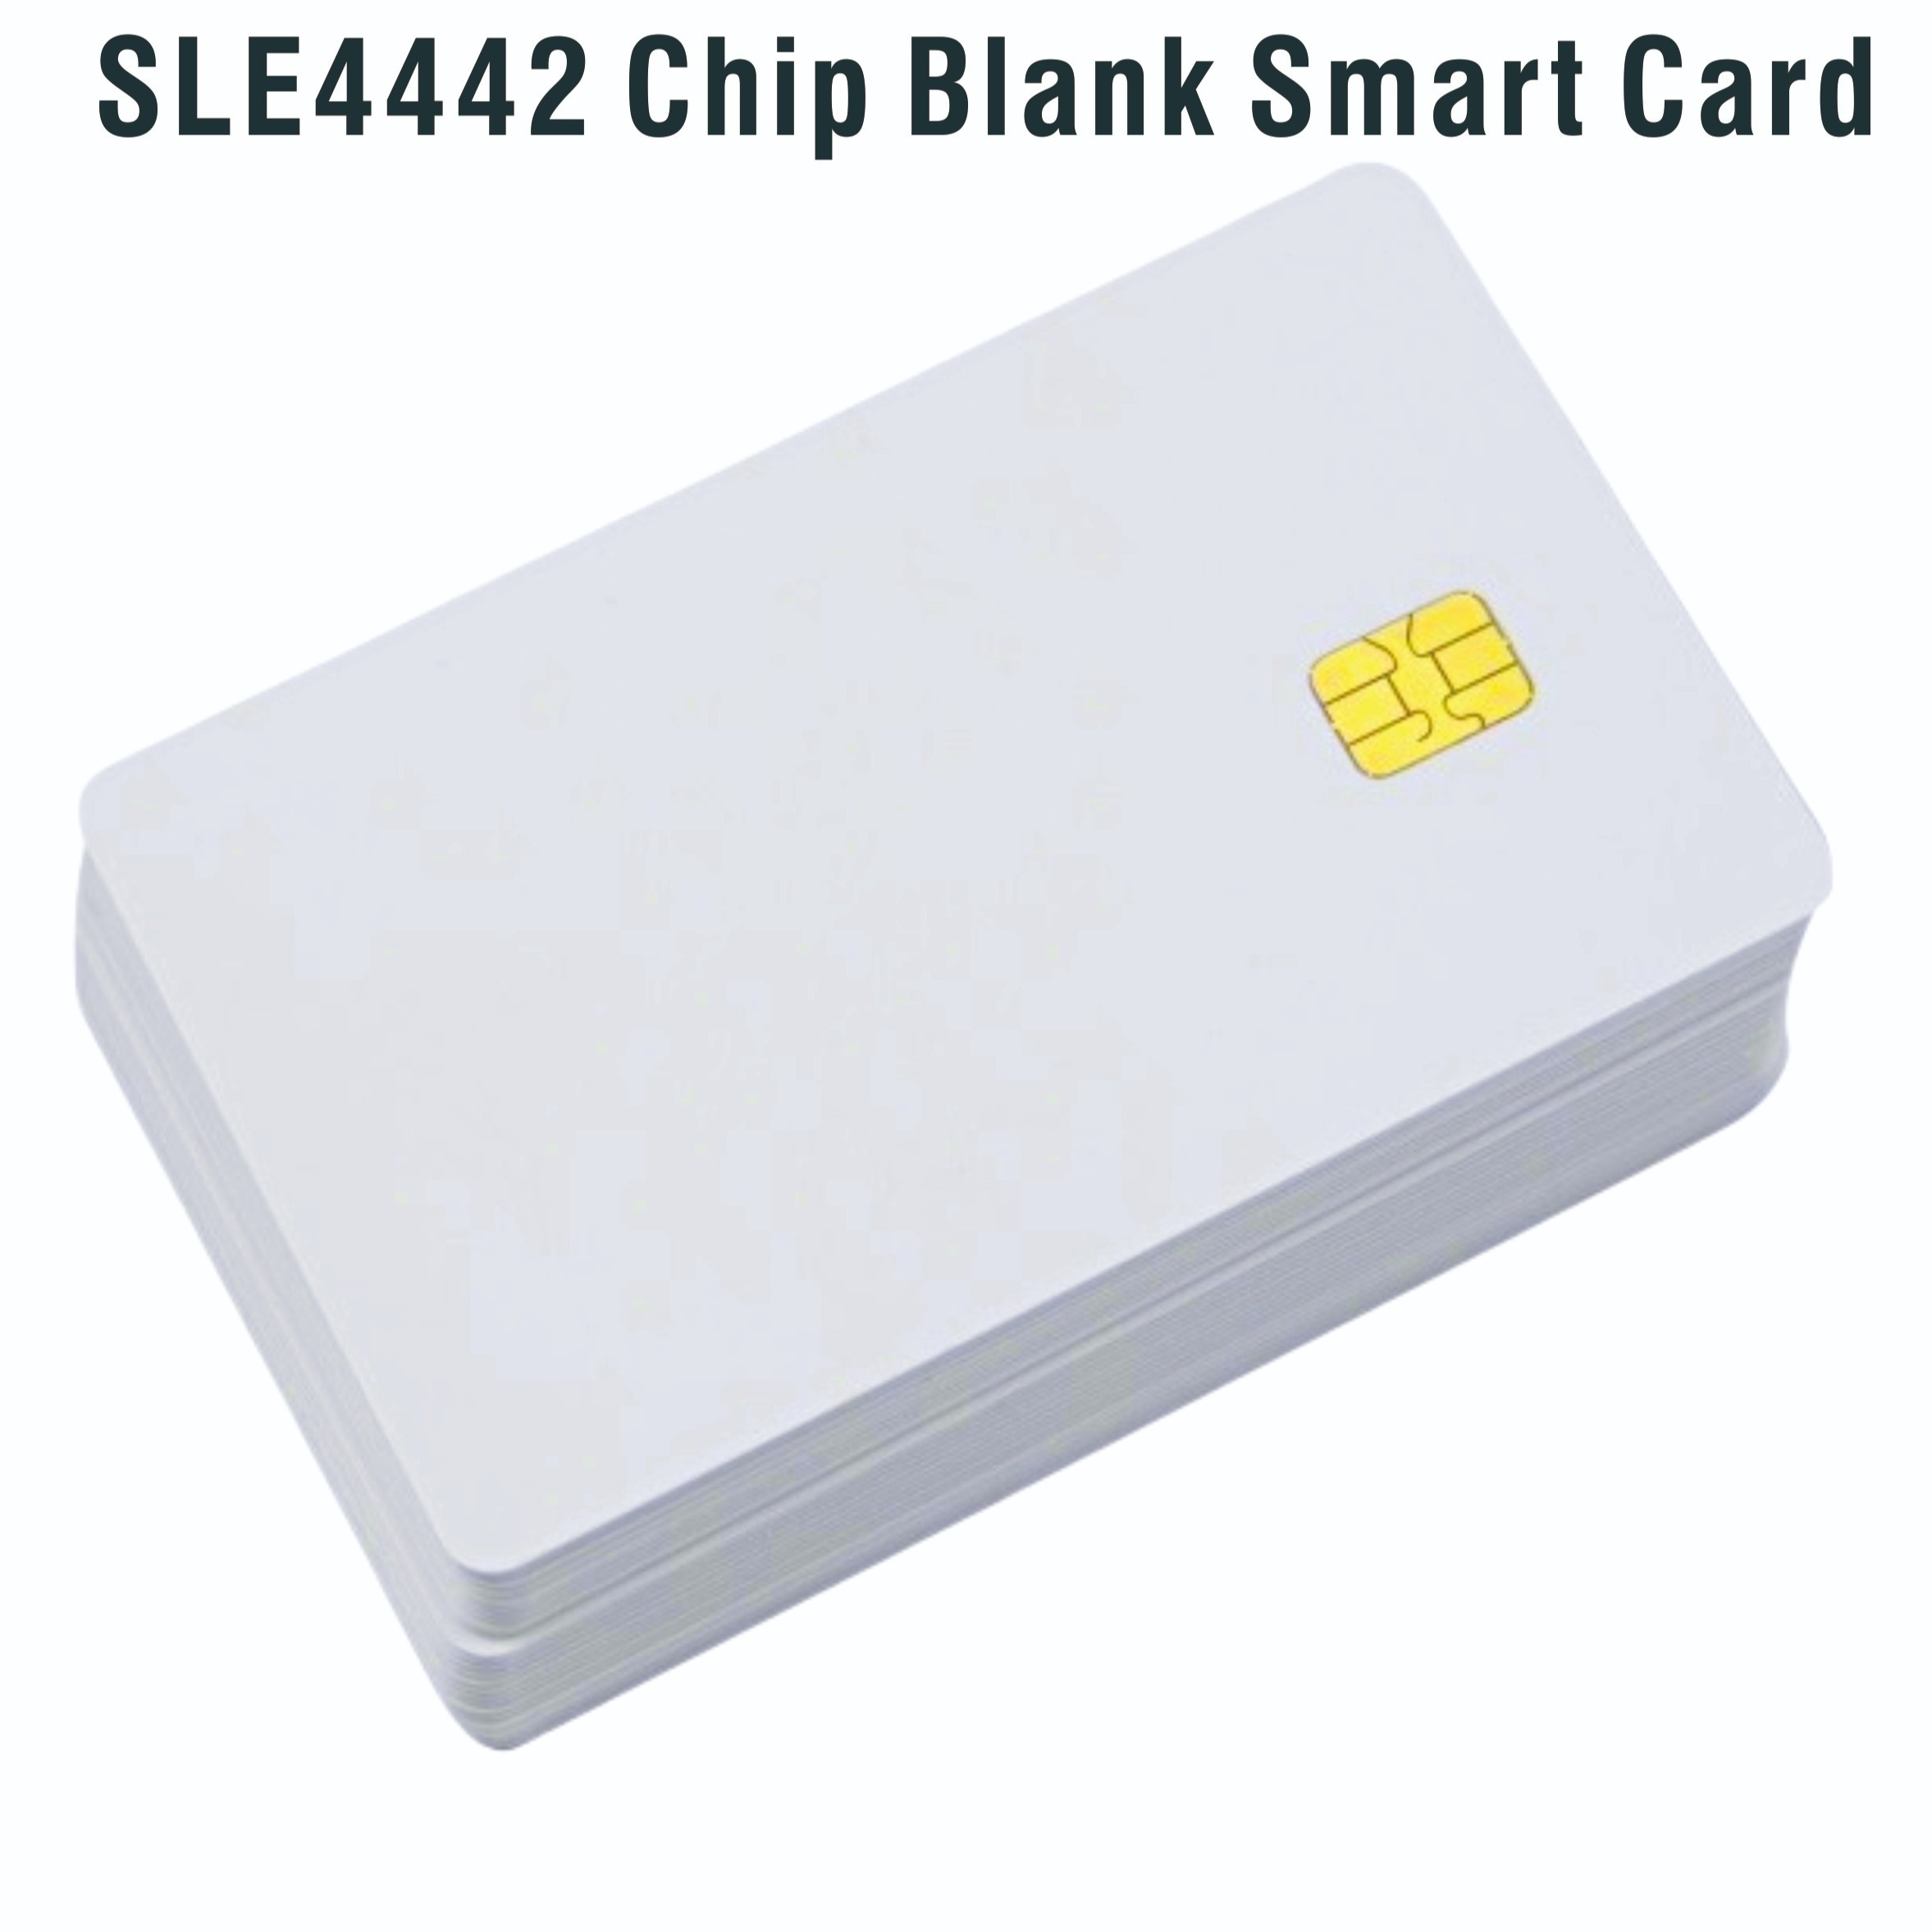 

Pvc Ic With Sle4442 Chip Blank Smart Card Contact Ic Card Safety White, Smart Intelligent Contact Ic Card, Contact Chip Pvc Card For Hotel Key Card/access Control System